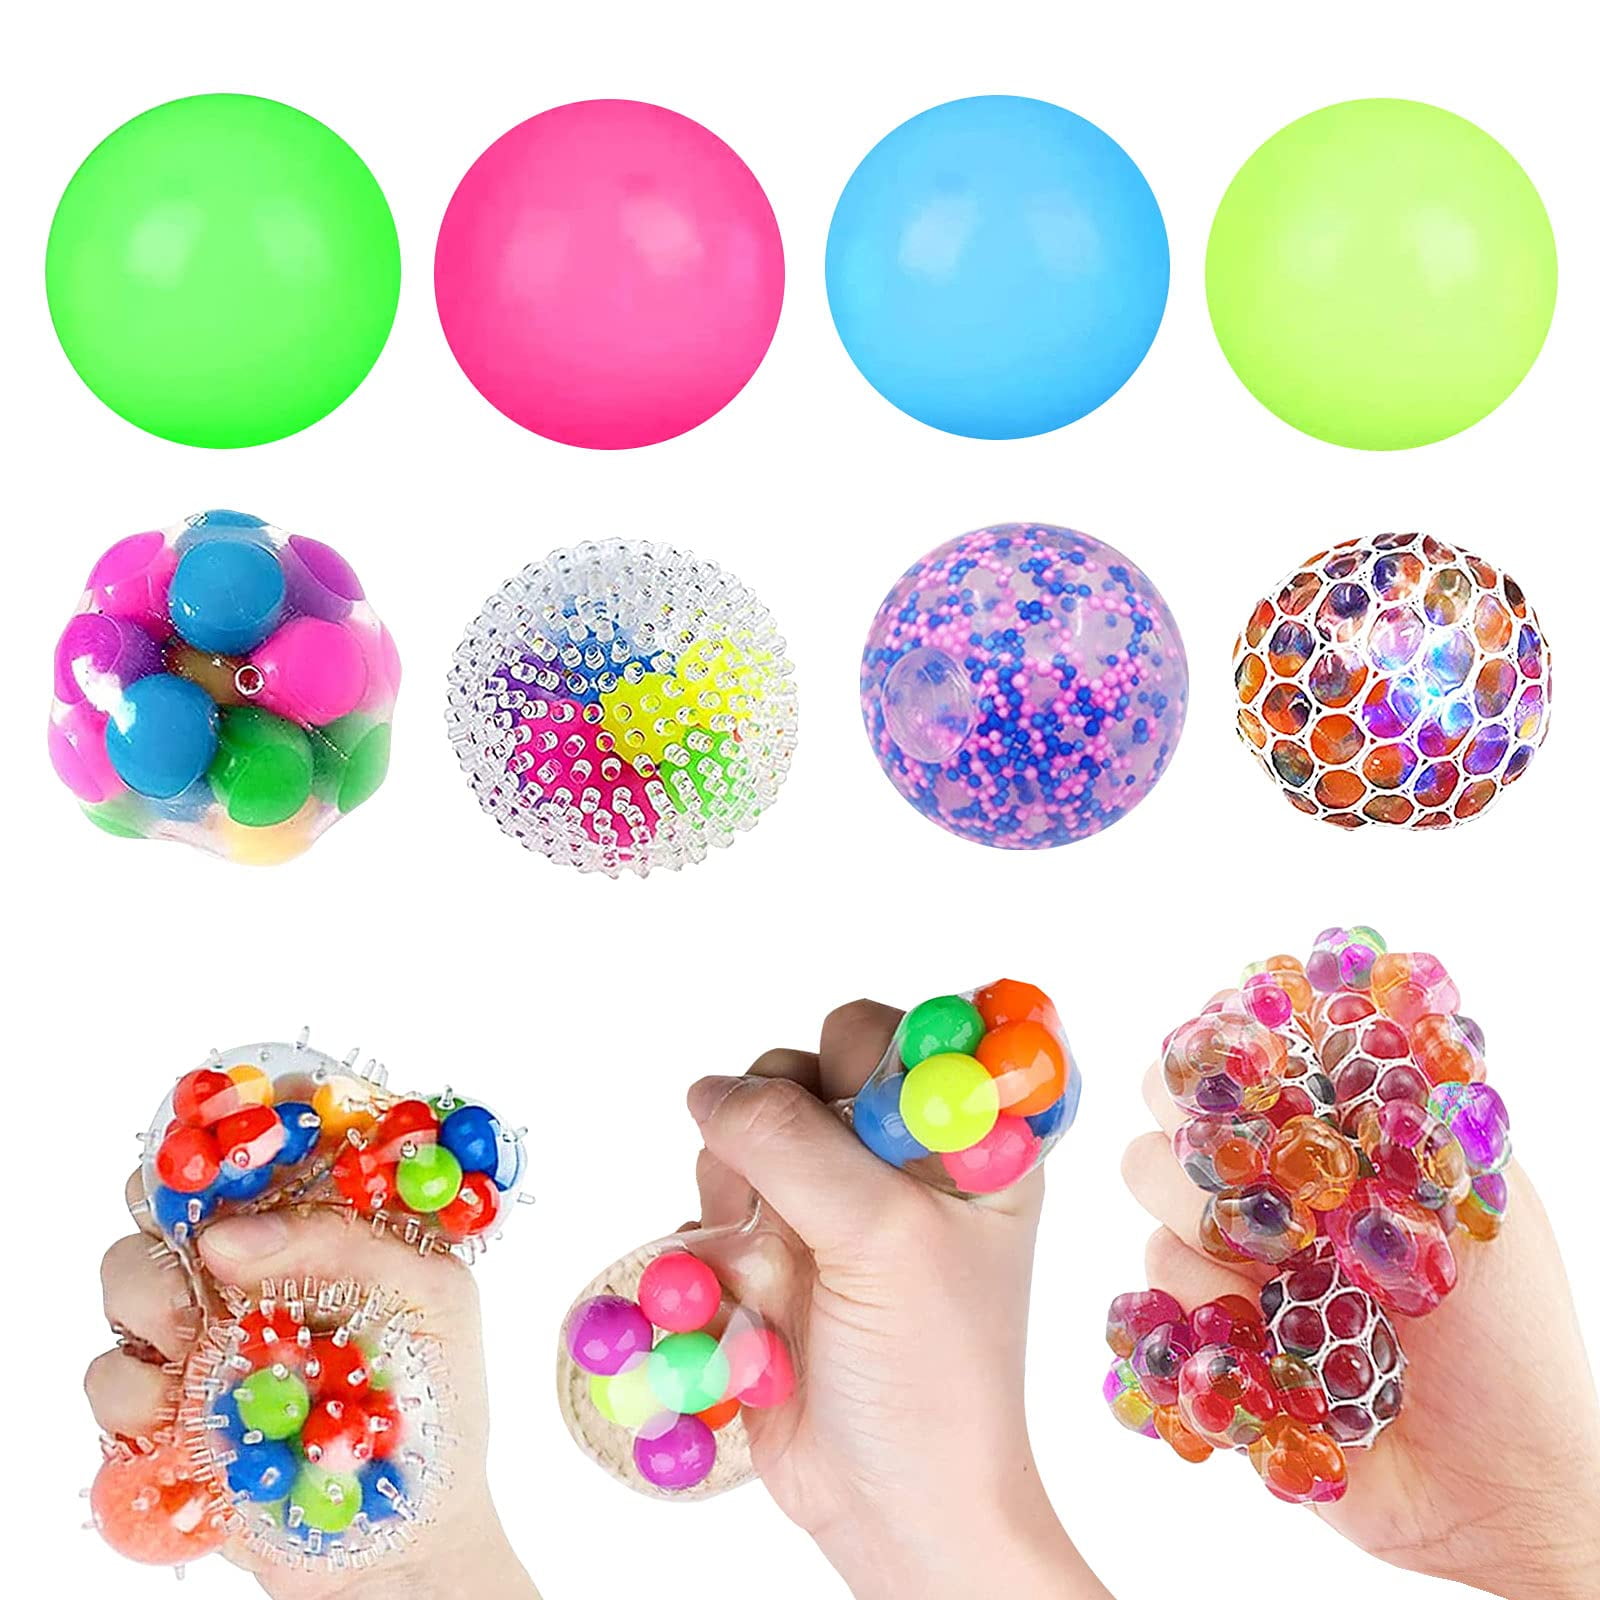 Silicone Sensory Fidget Toy Adult Gift Autism Stress Relief Squeeze Squishy Ball 